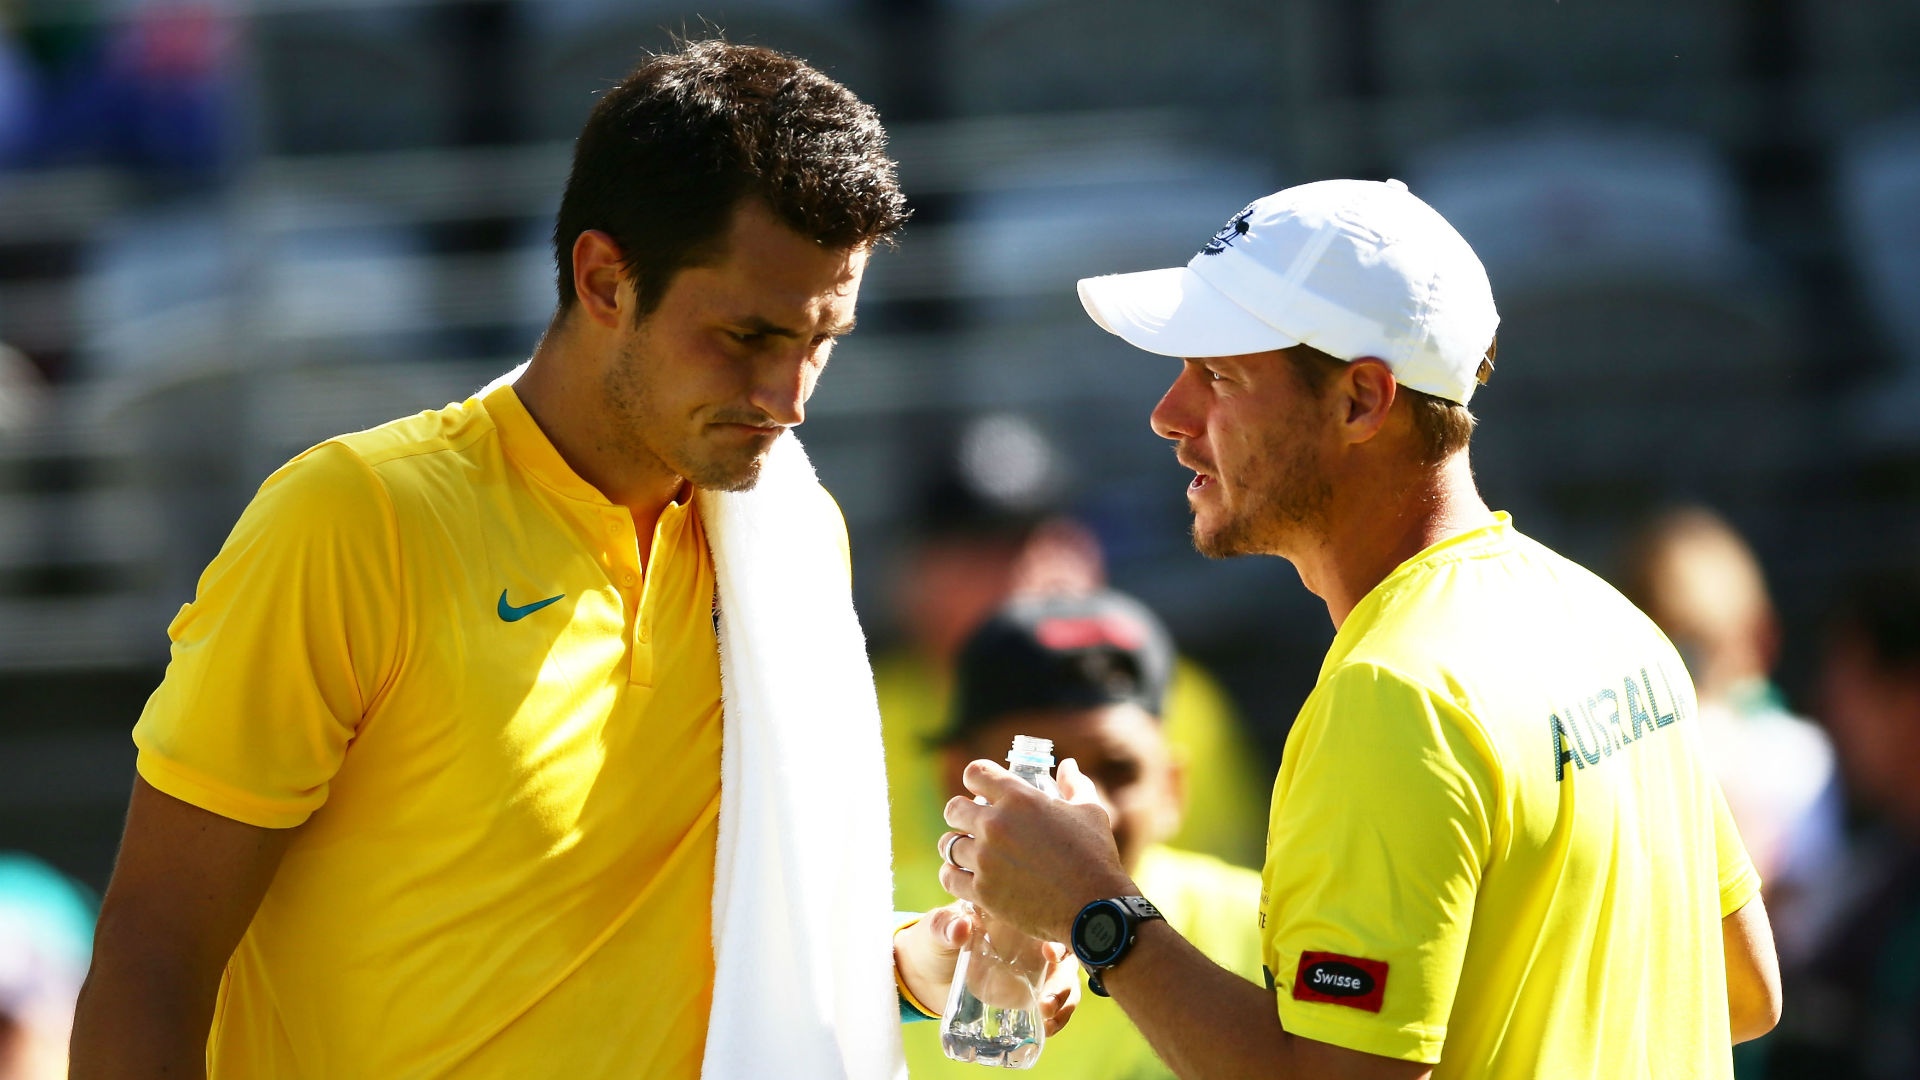 After being attacked by Bernard Tomic, Lleyton Hewitt laughed off the criticism.